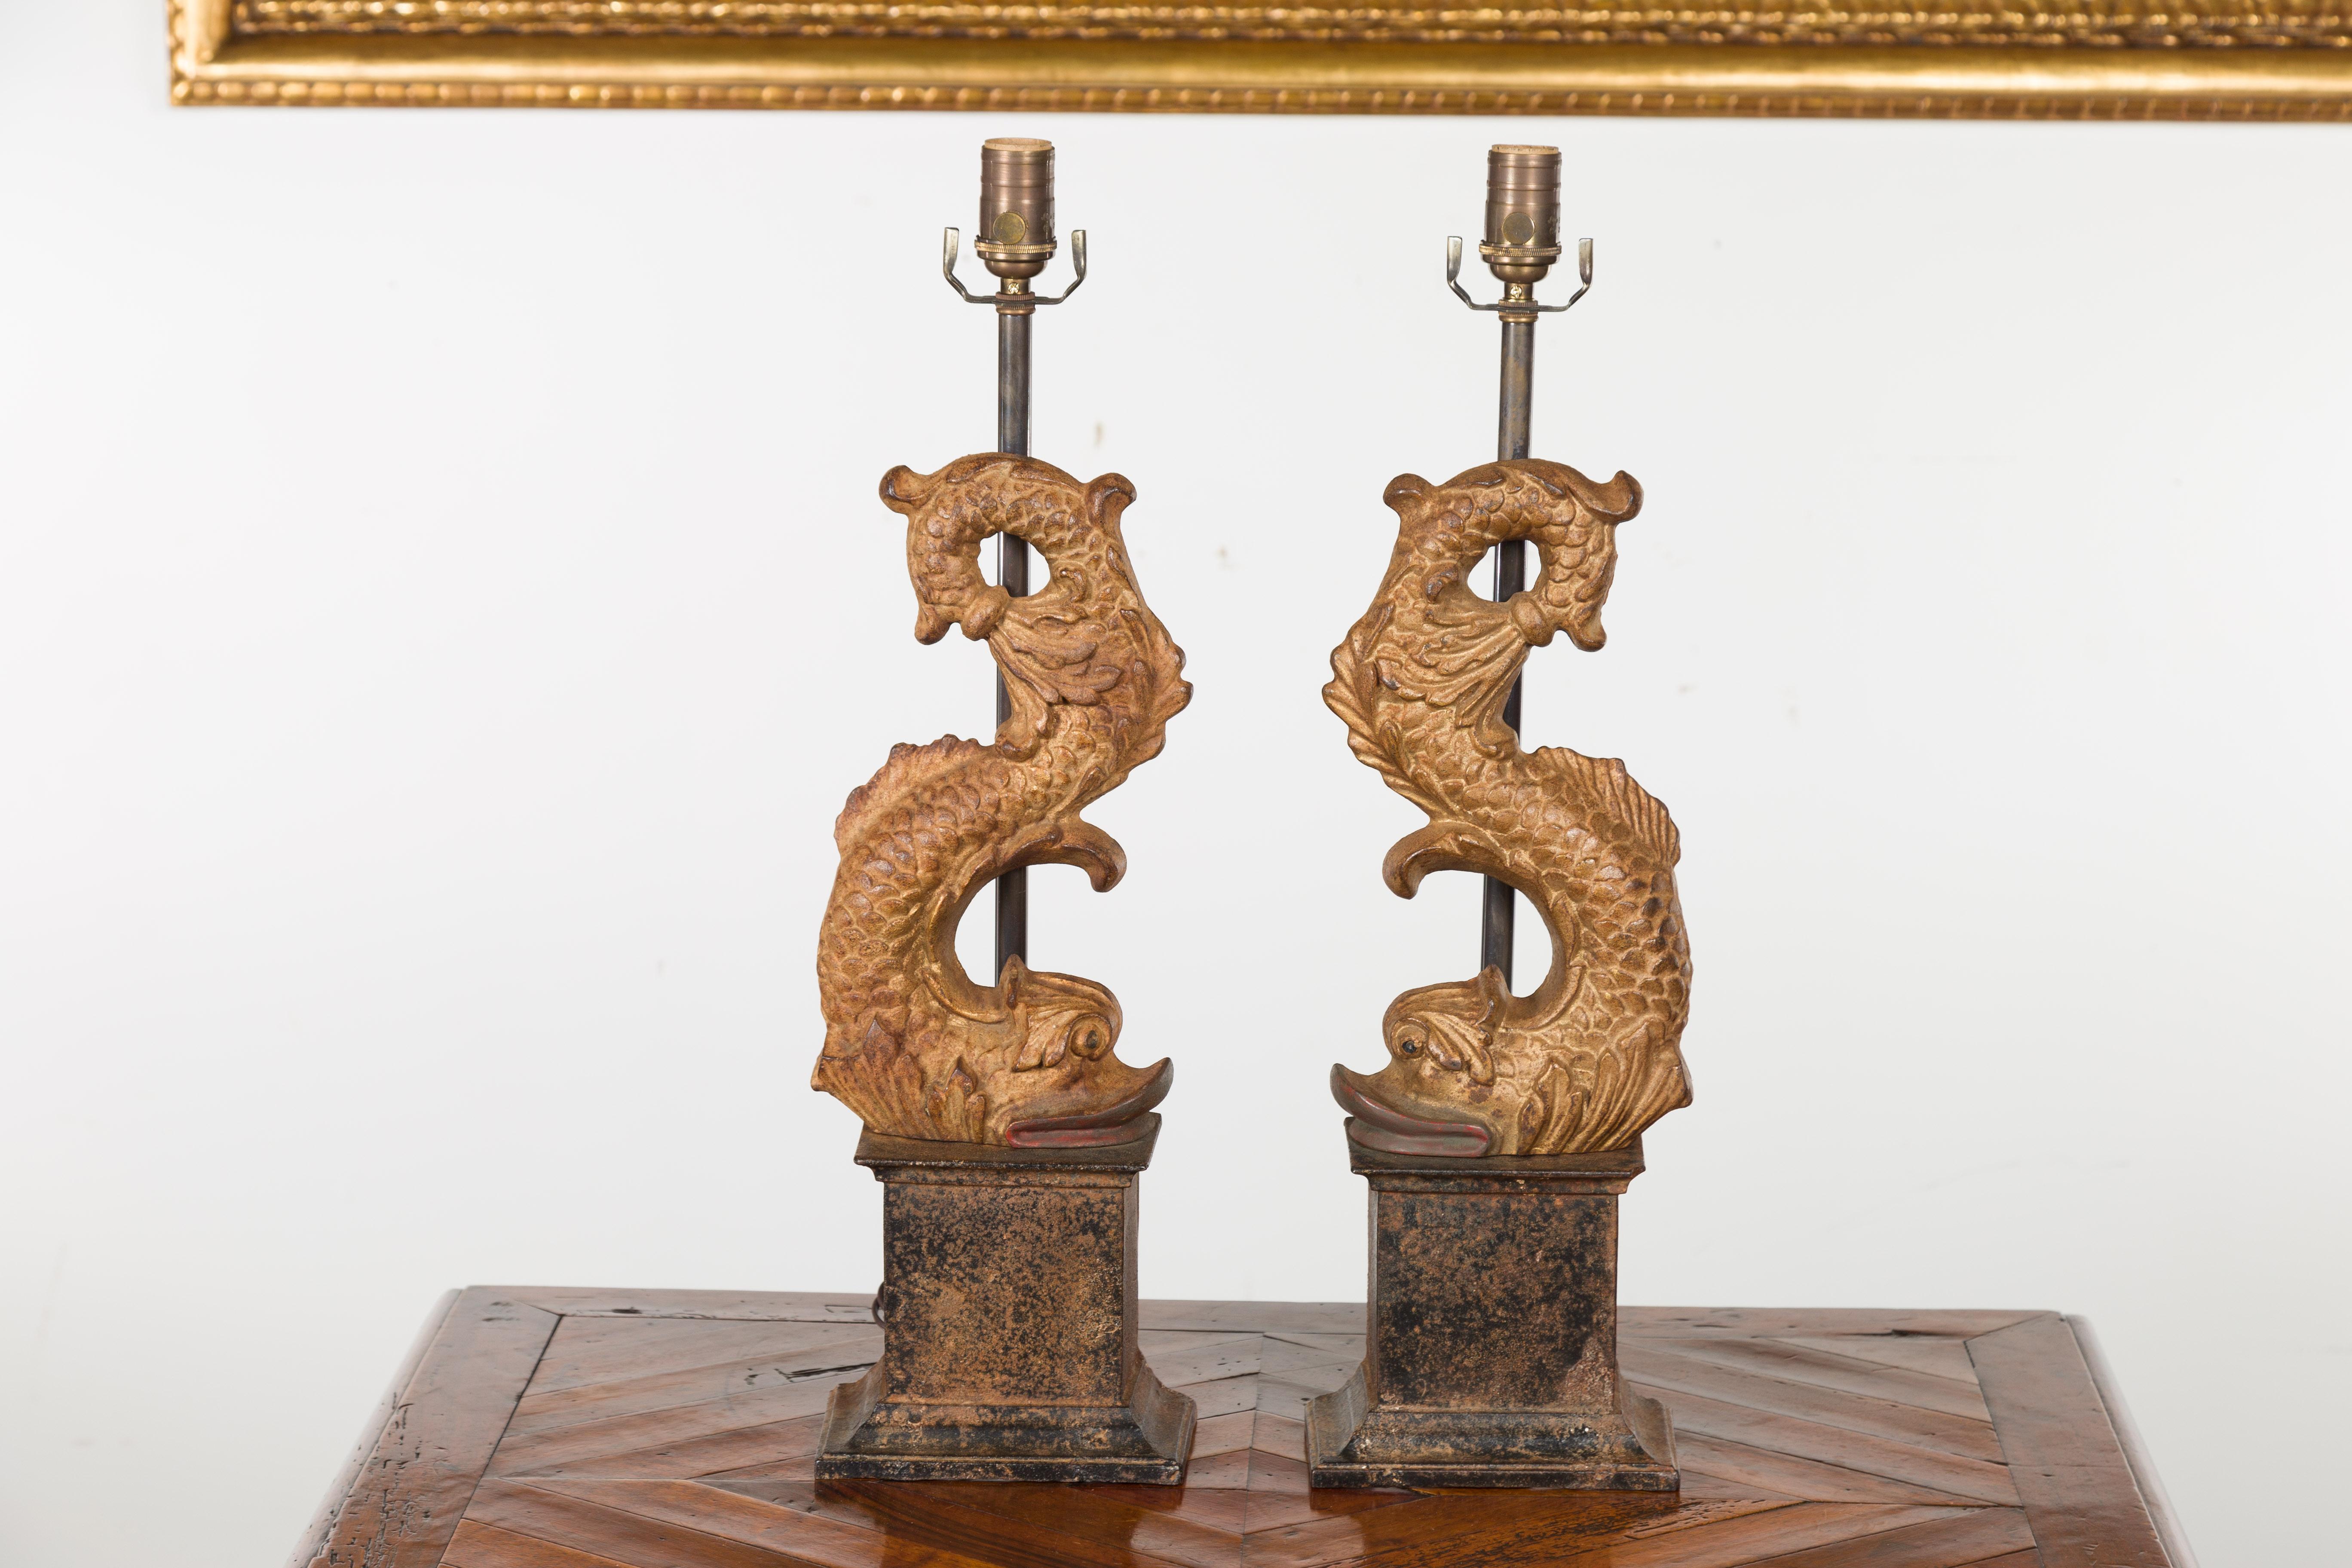 A pair of Italian gilt iron Baroque style dolphin sculptures from the early 20th century, made into lamps and mounted on tall bases. Created in Italy during the first quarter of the 20th century, each of this pair of sculptures features a dolphin